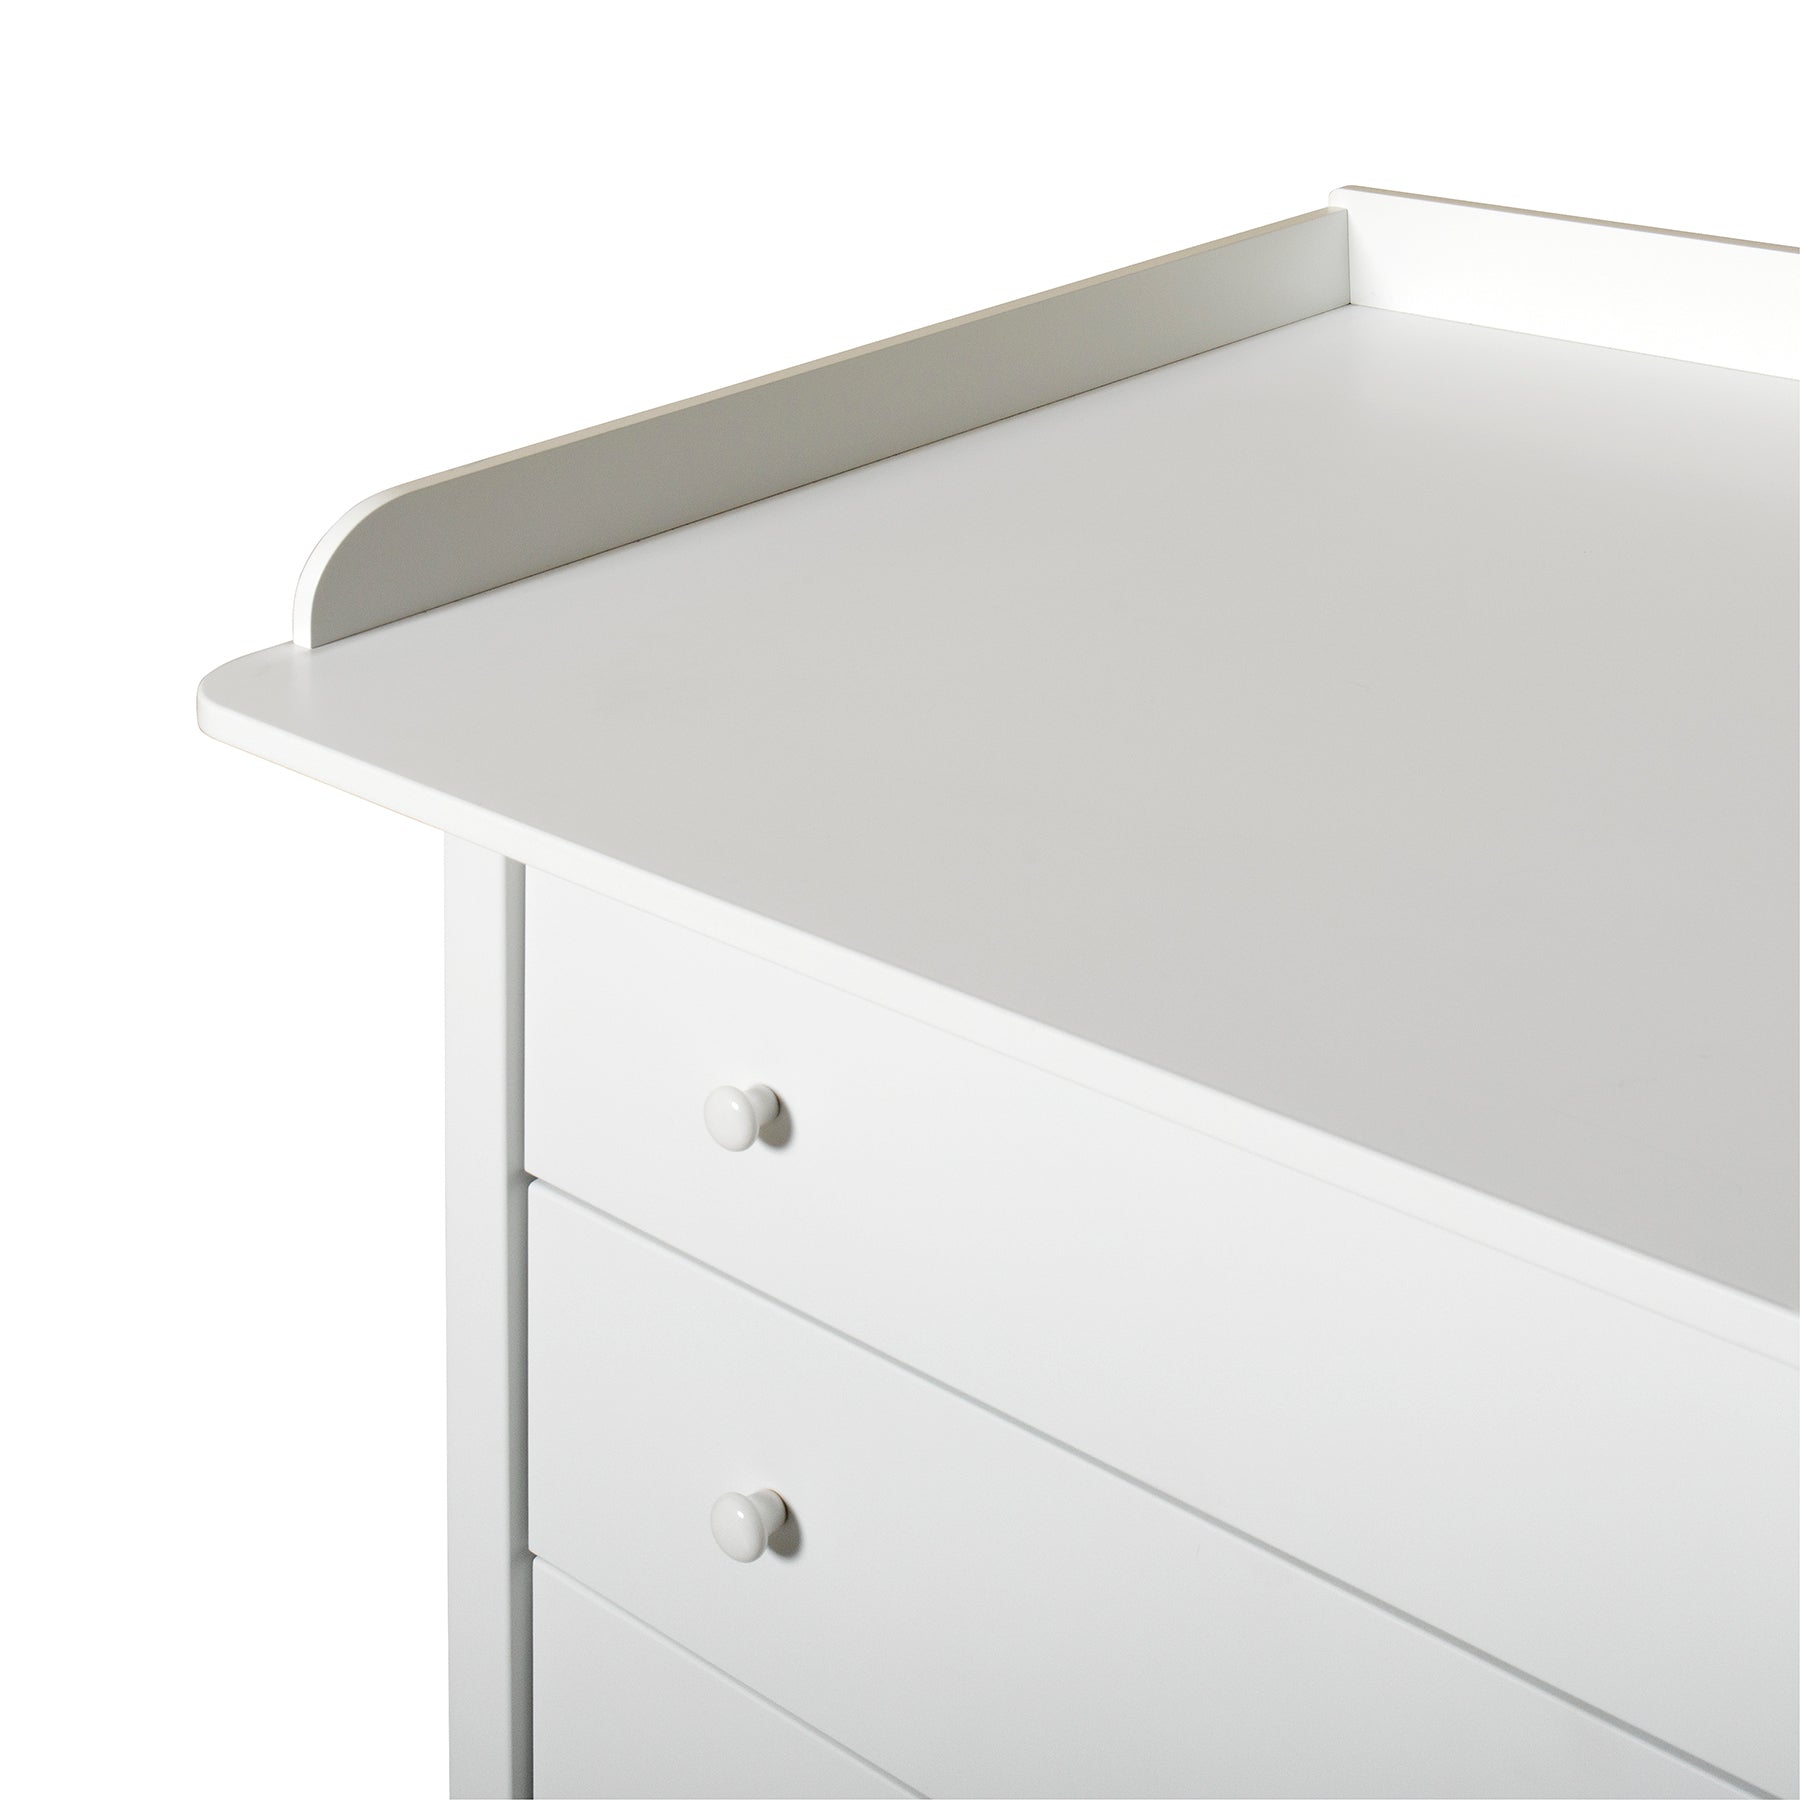 Oliver Furniture Seaside changing table with four drawers, white